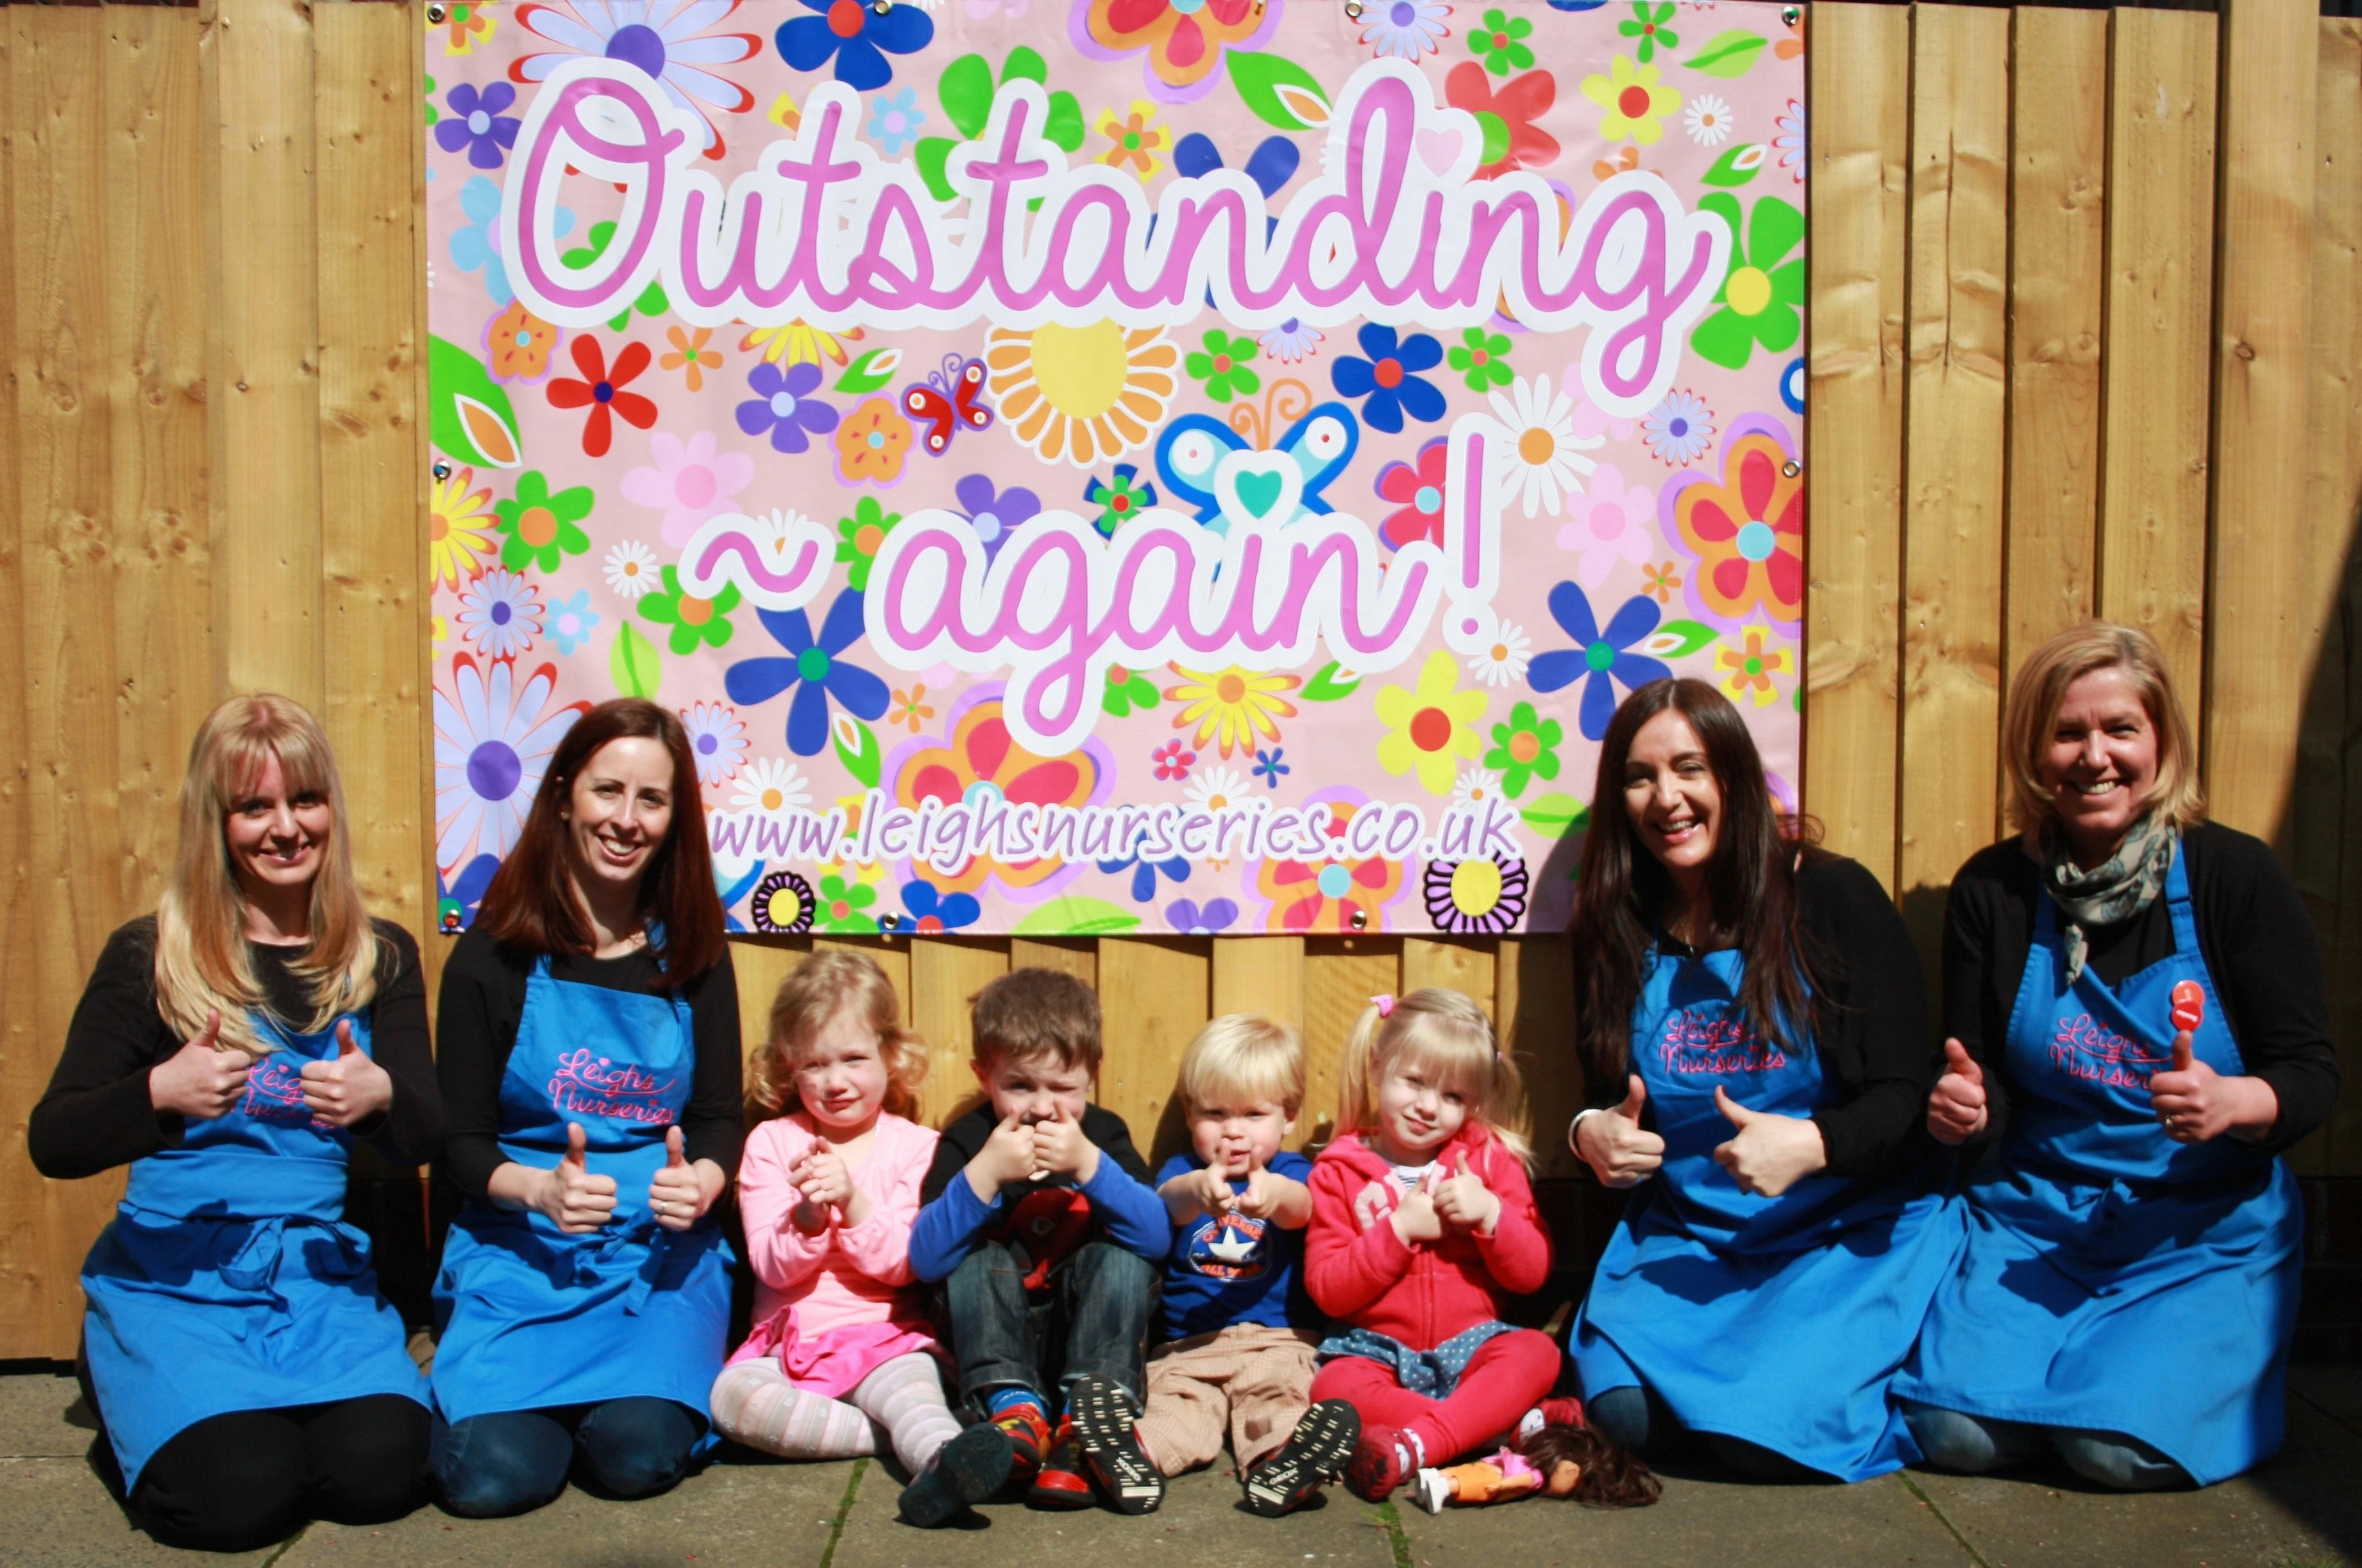 Kids and staff at Leighs Nurseries